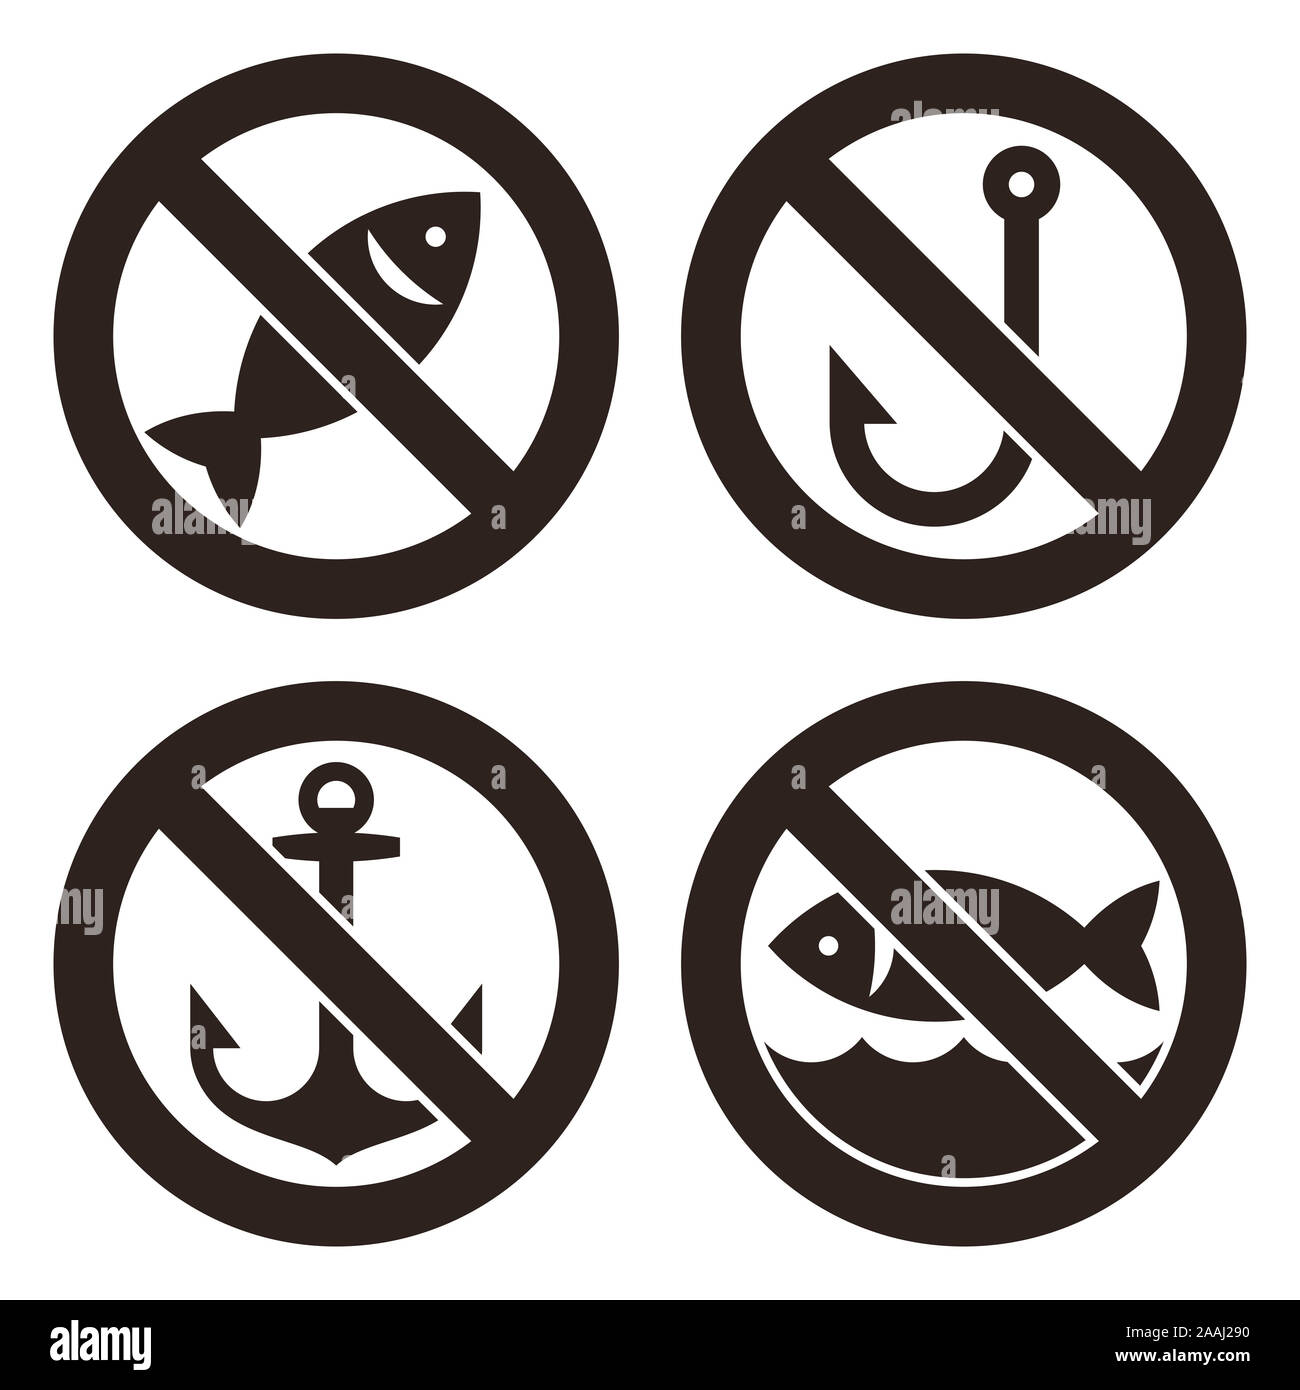 No fishing allowed and no anchoring signs isolated on white background Stock Photo